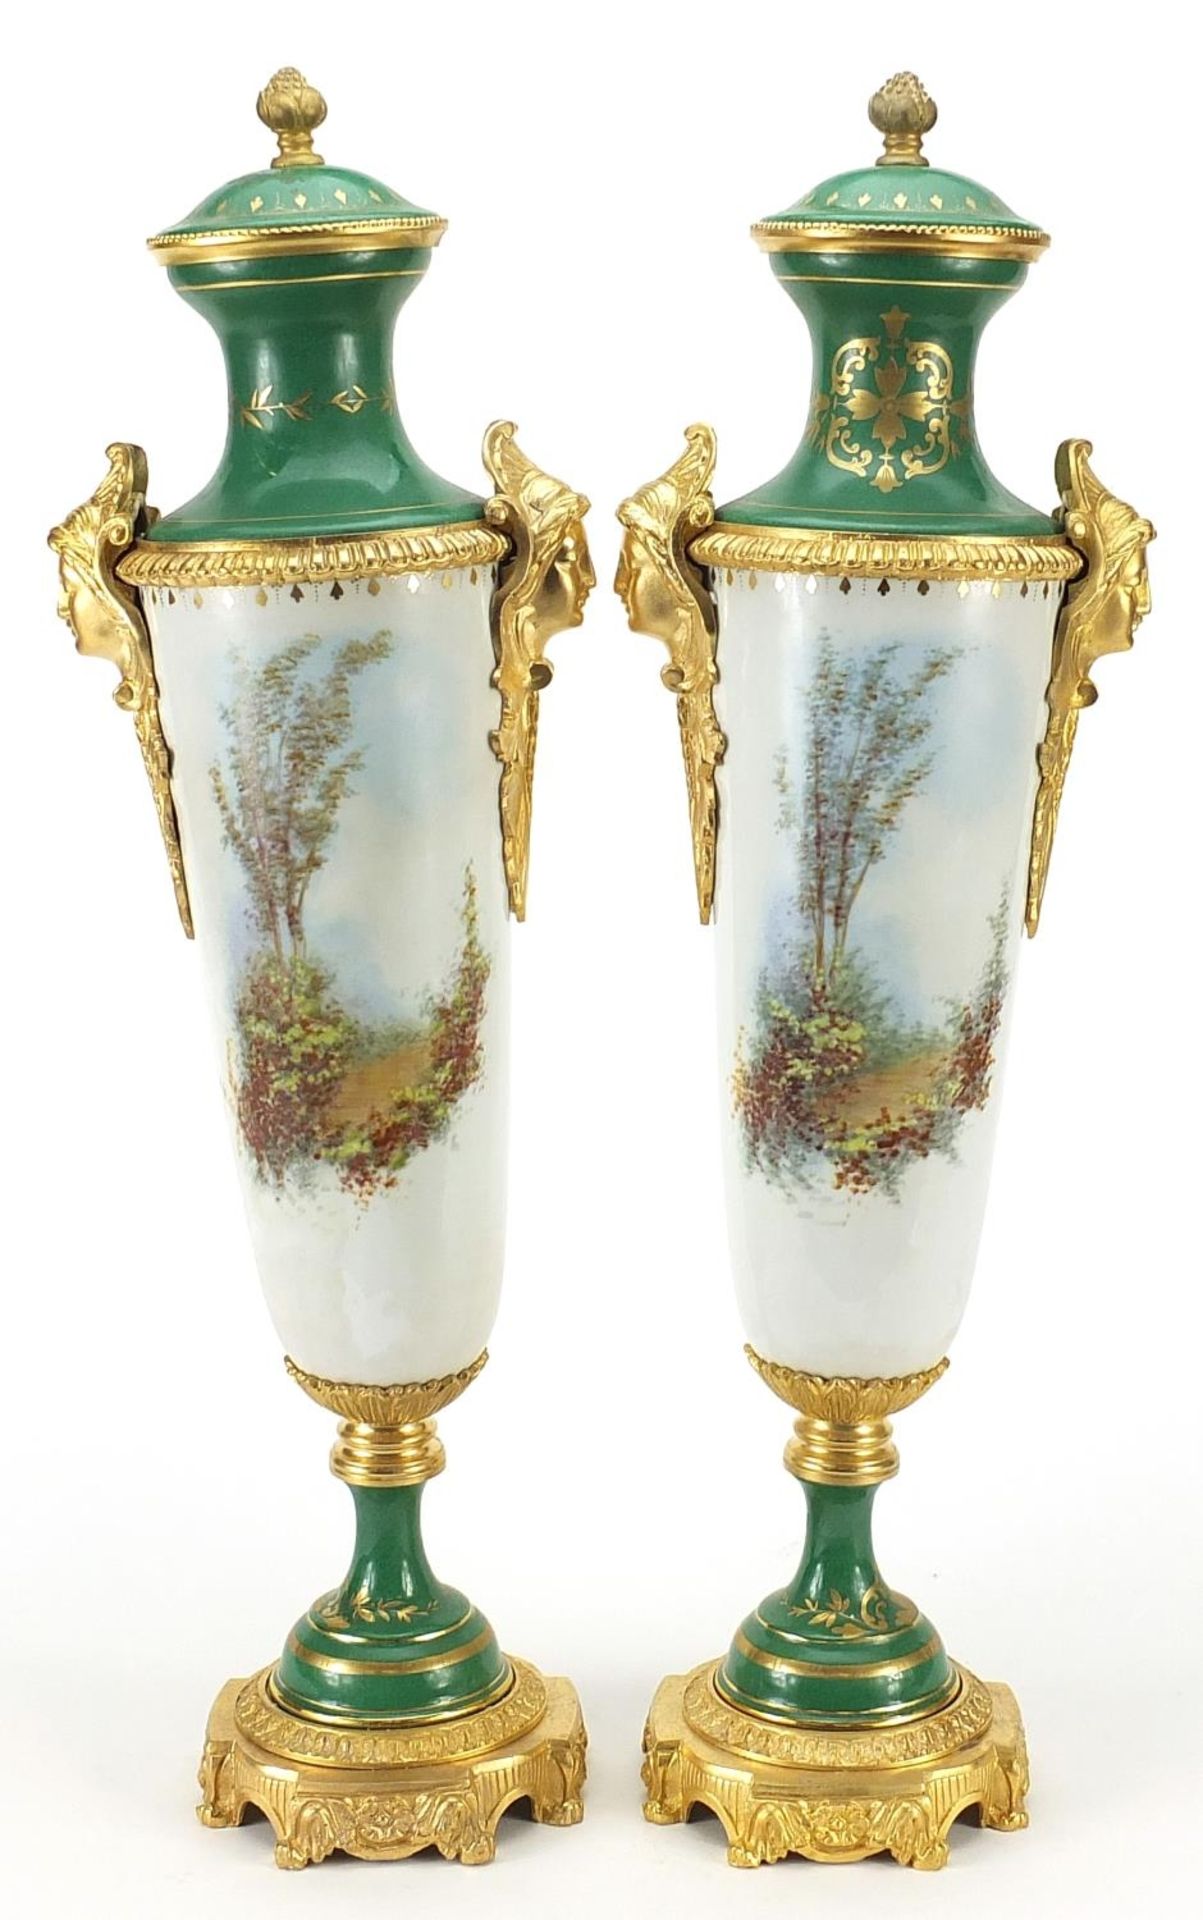 Large pair of French porcelain vases and covers with gilt bronze mounts in the style of Sevres, each - Image 2 of 3